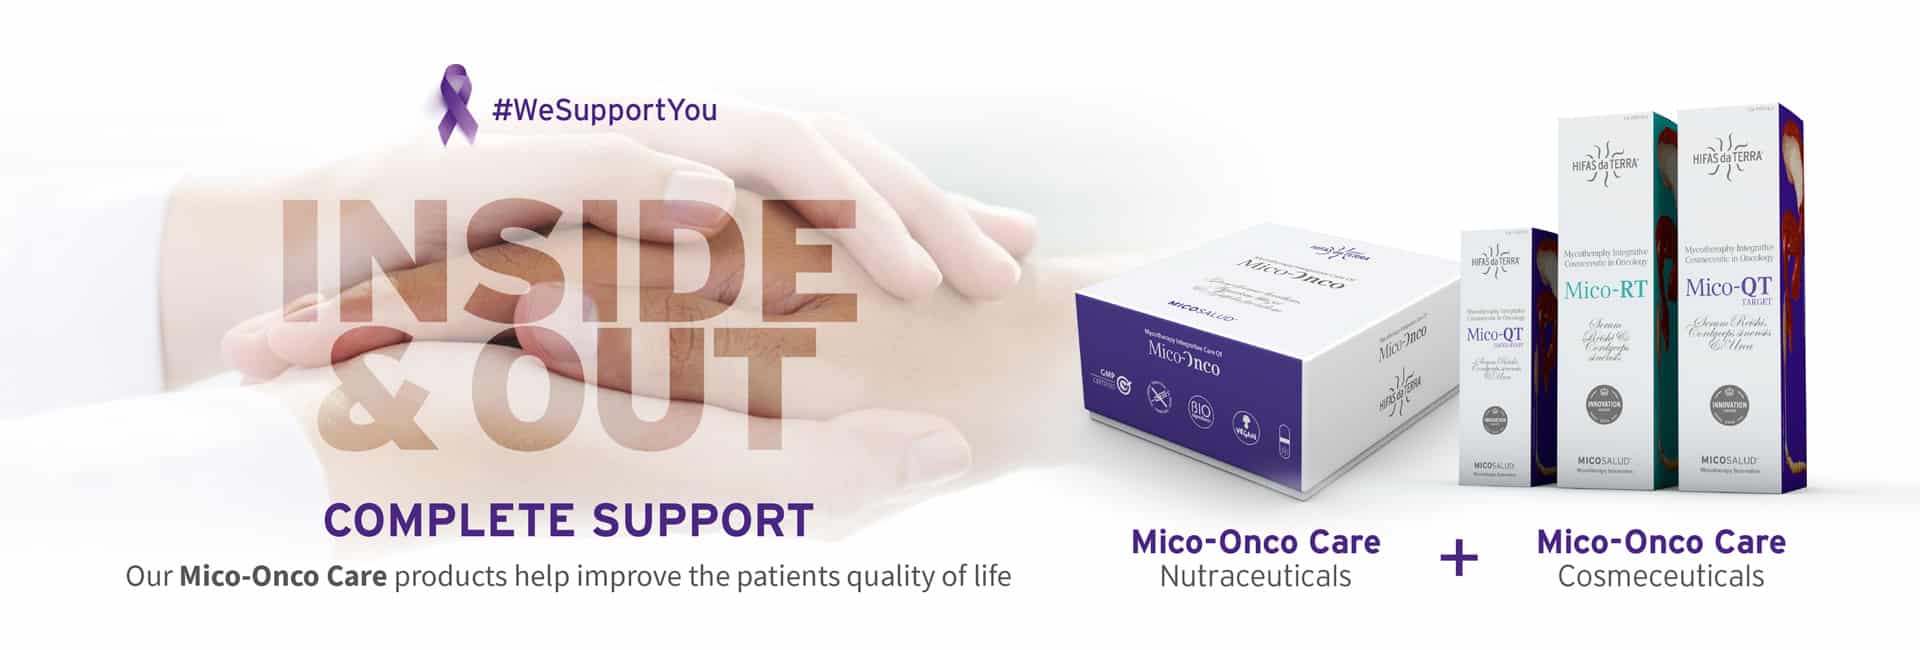 Integral support - oncology products